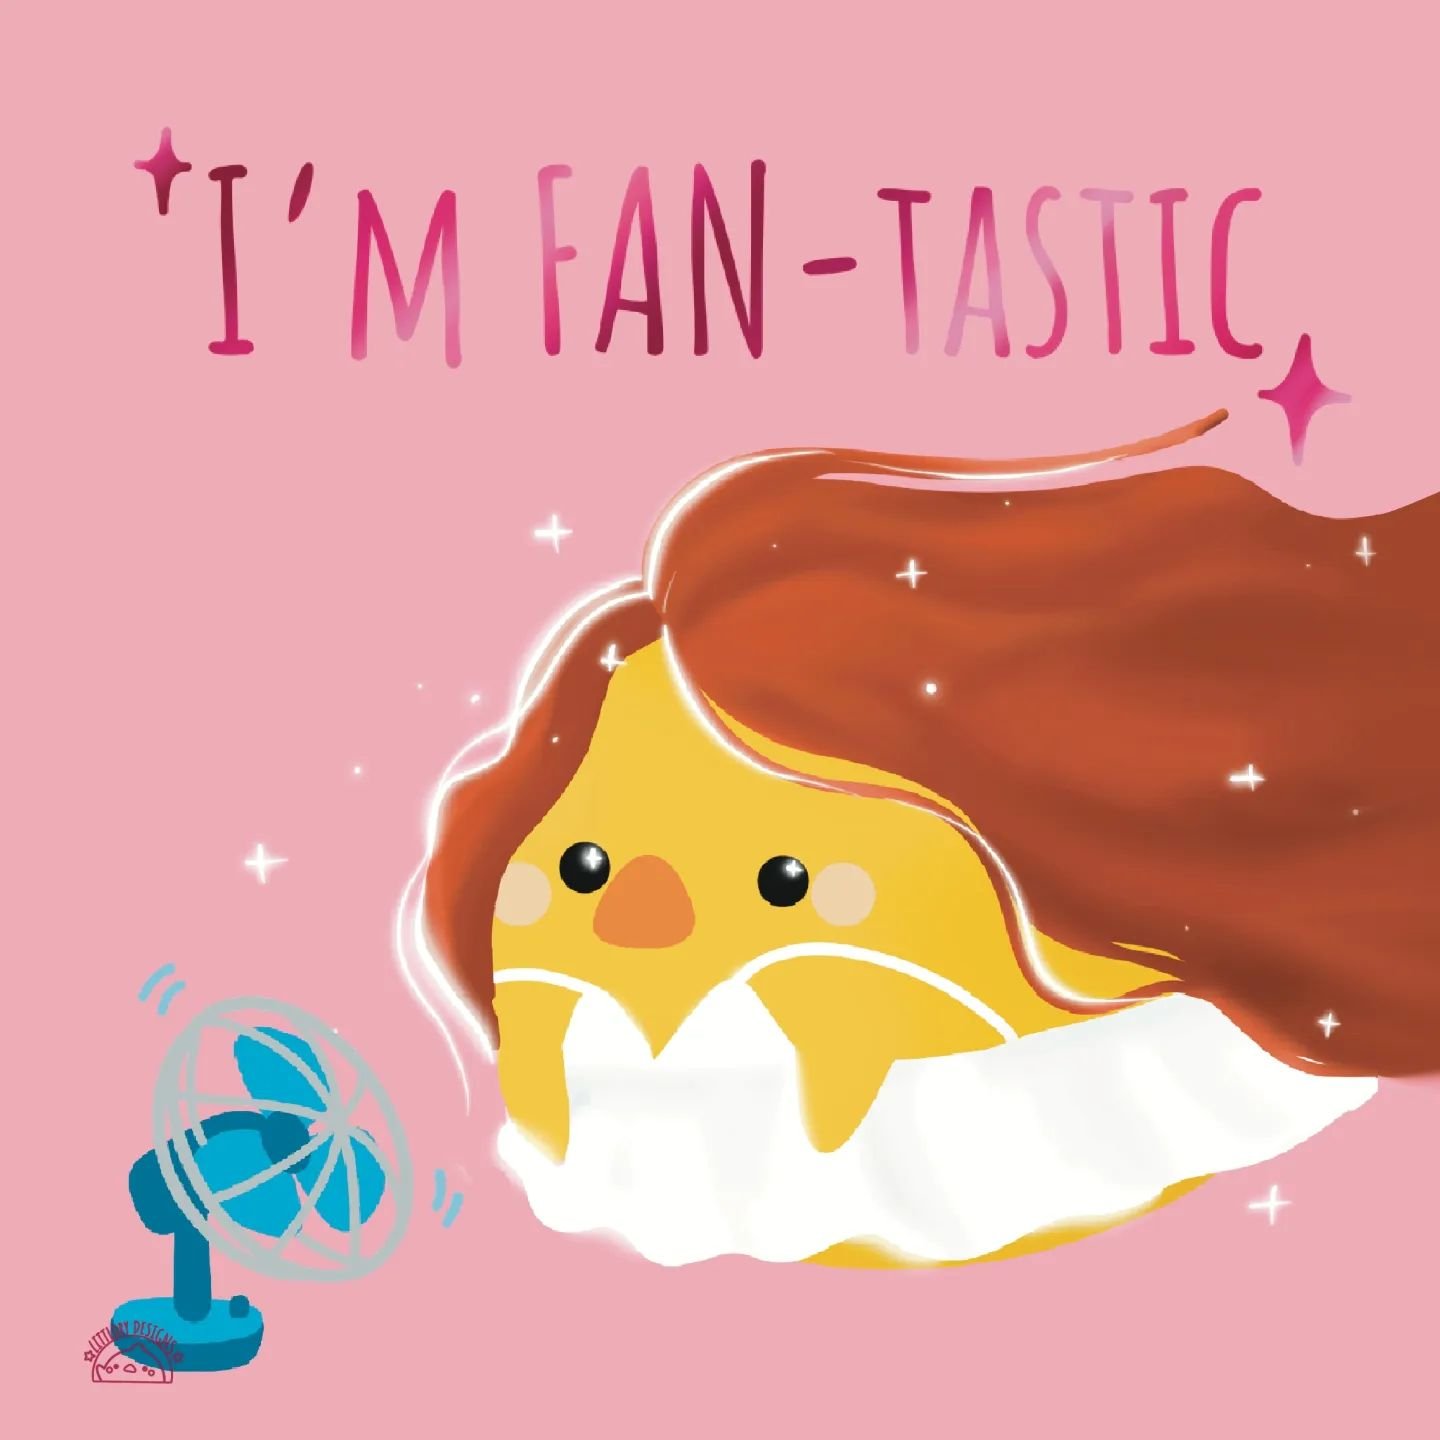 Be fantastic today!😍🌬

Share to the one who needs this message too!👀

#illustrationoftheday #fantastic #illustrationartists #positivevibes #princess #prettygirls #fantasticmoments #drawingoftheday #digitalartist #cutechickens #kawaii #melbournemar